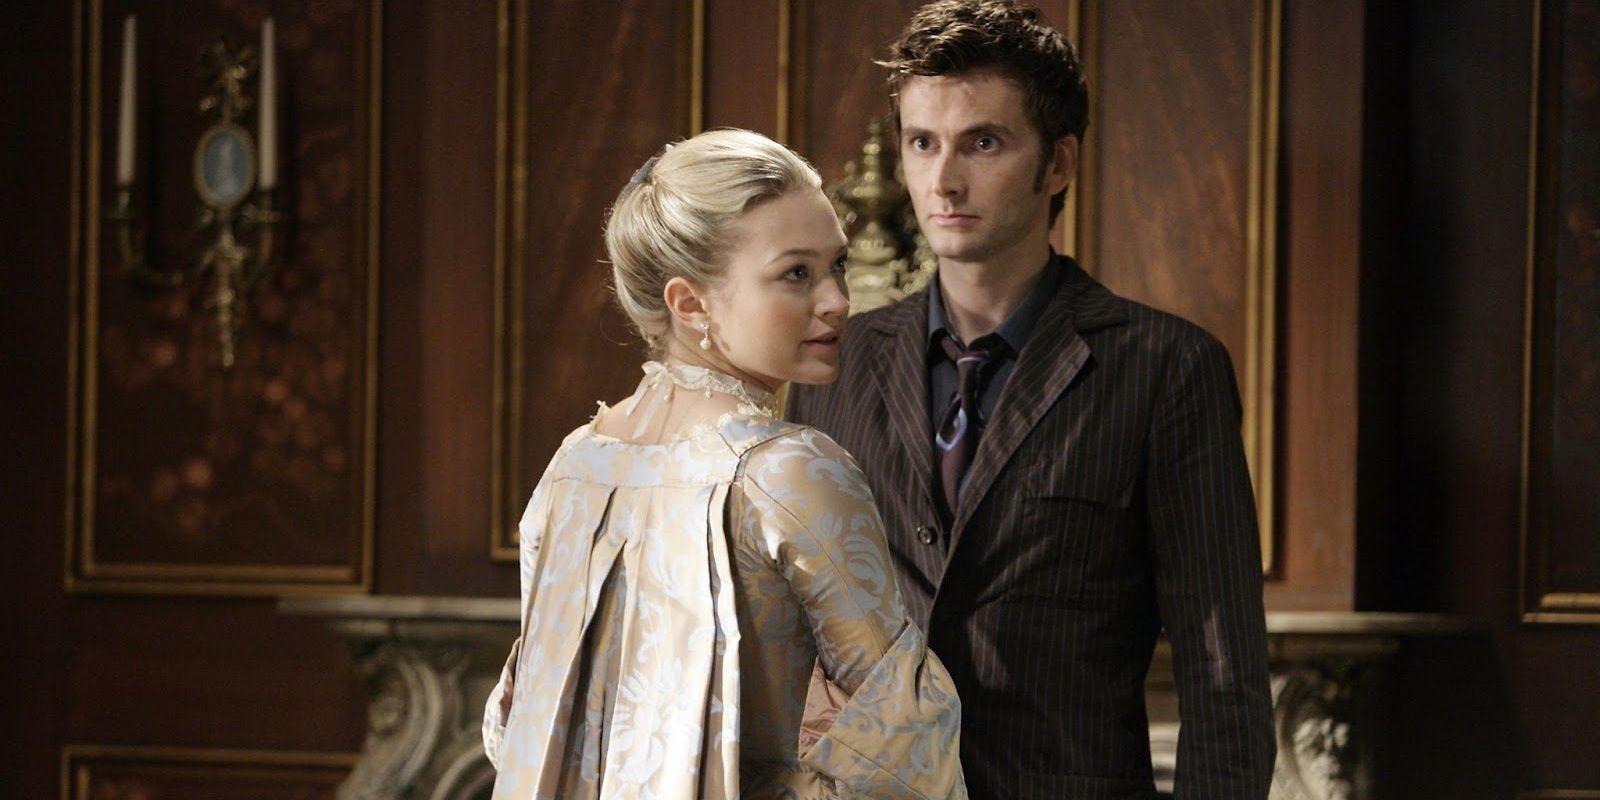 Tenth Doctor and Madame de Pompadour in the Doctor Who episode The Girl in the Fireplace.